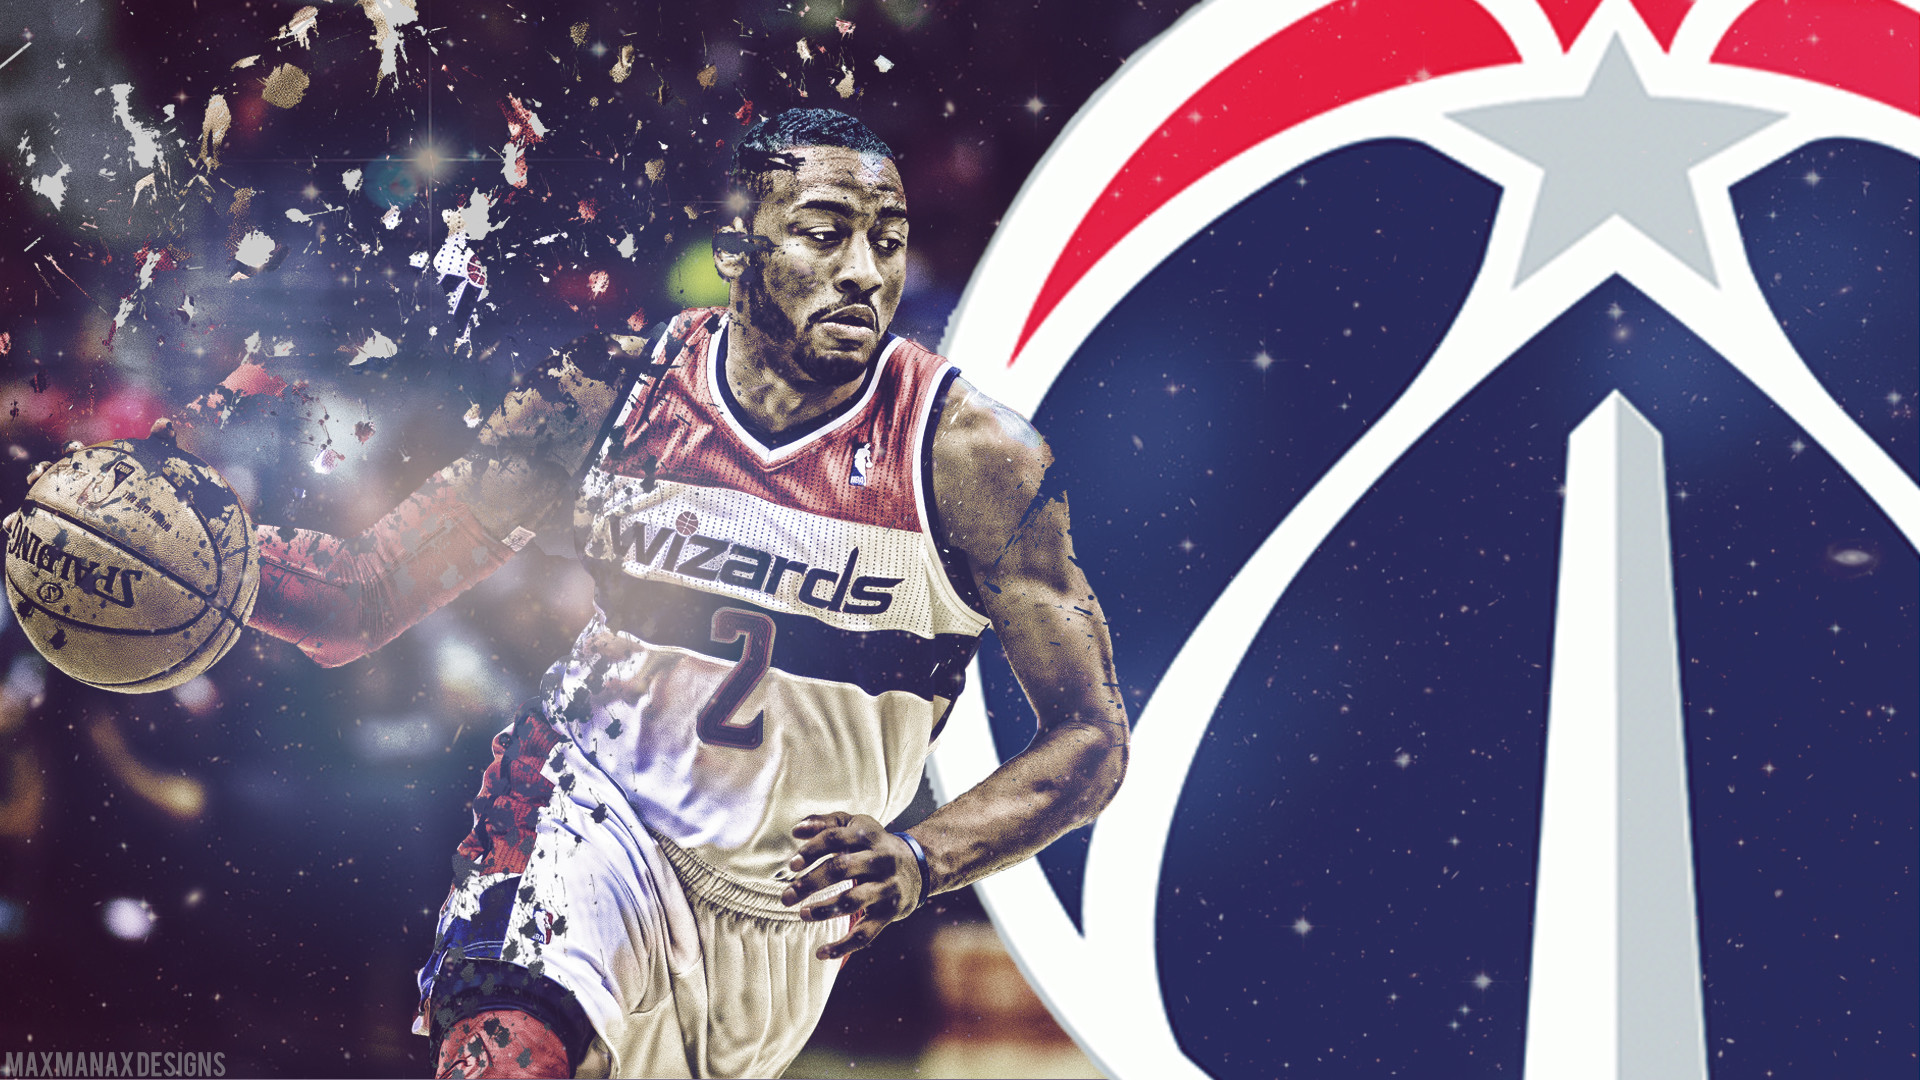 Wizards Wallpaper (68+ images)1920 x 1080